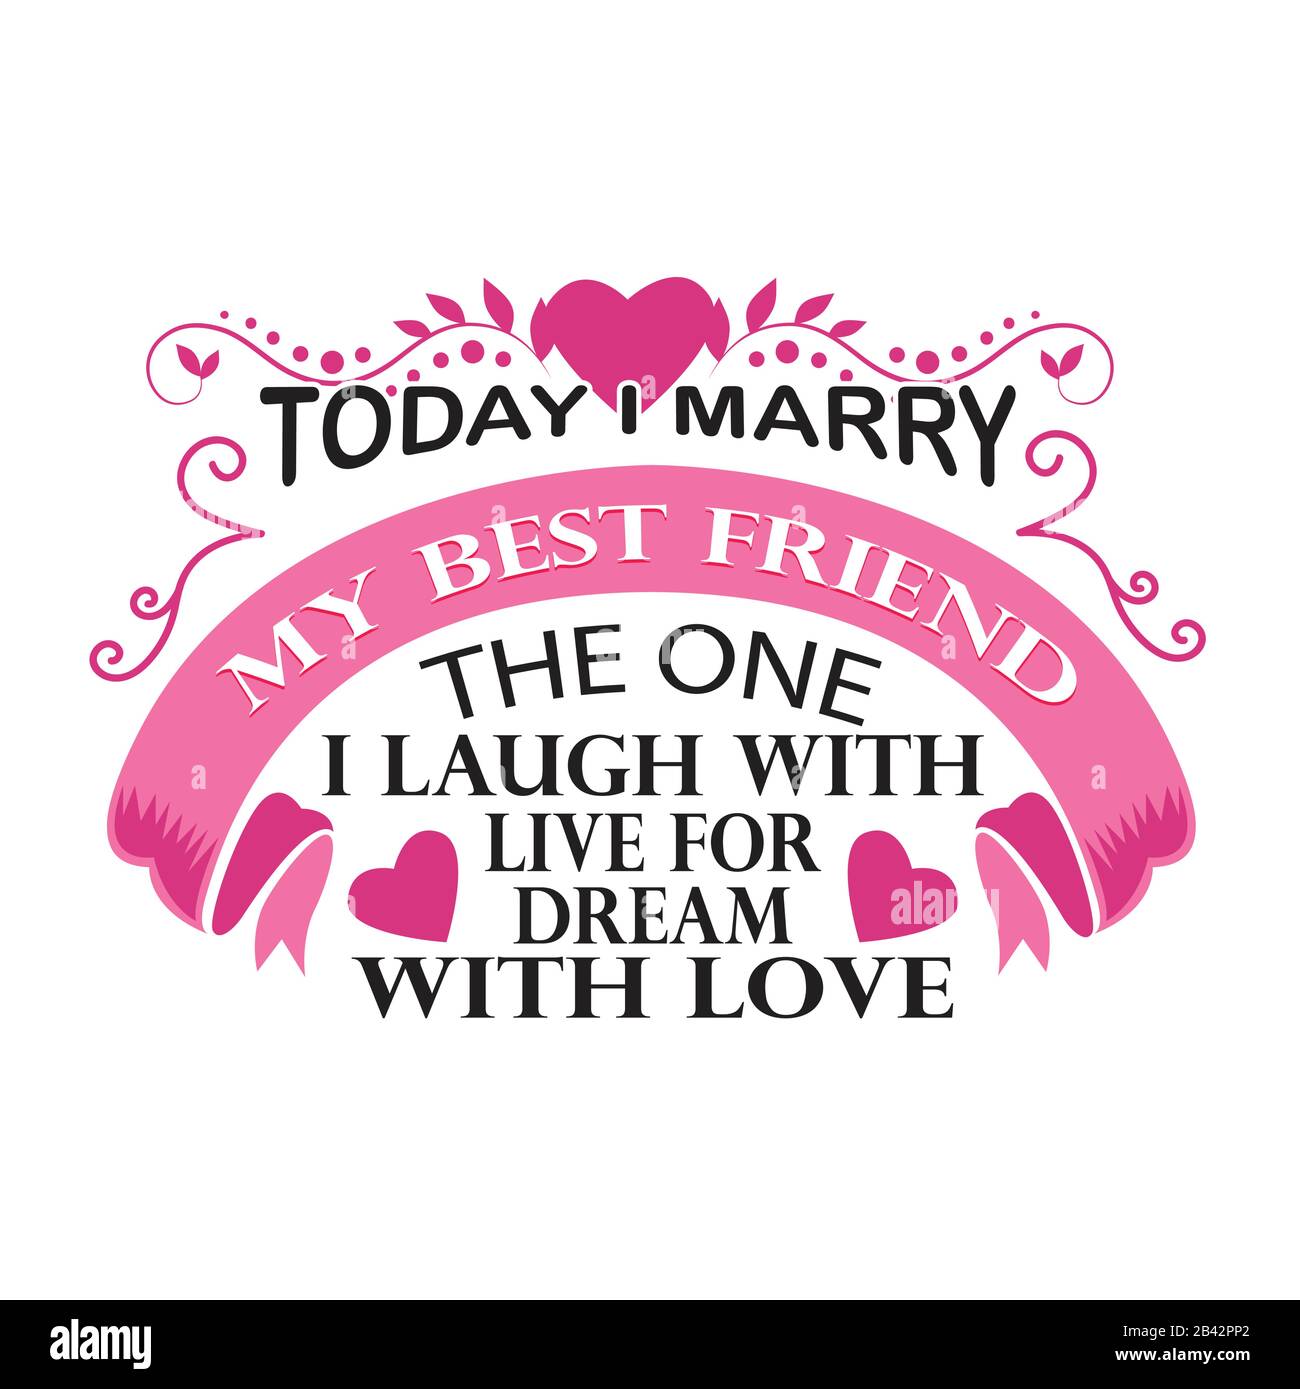 Pink Shabby Chic  Today I Will Marry My Best Friend Personalised Wedding Sign